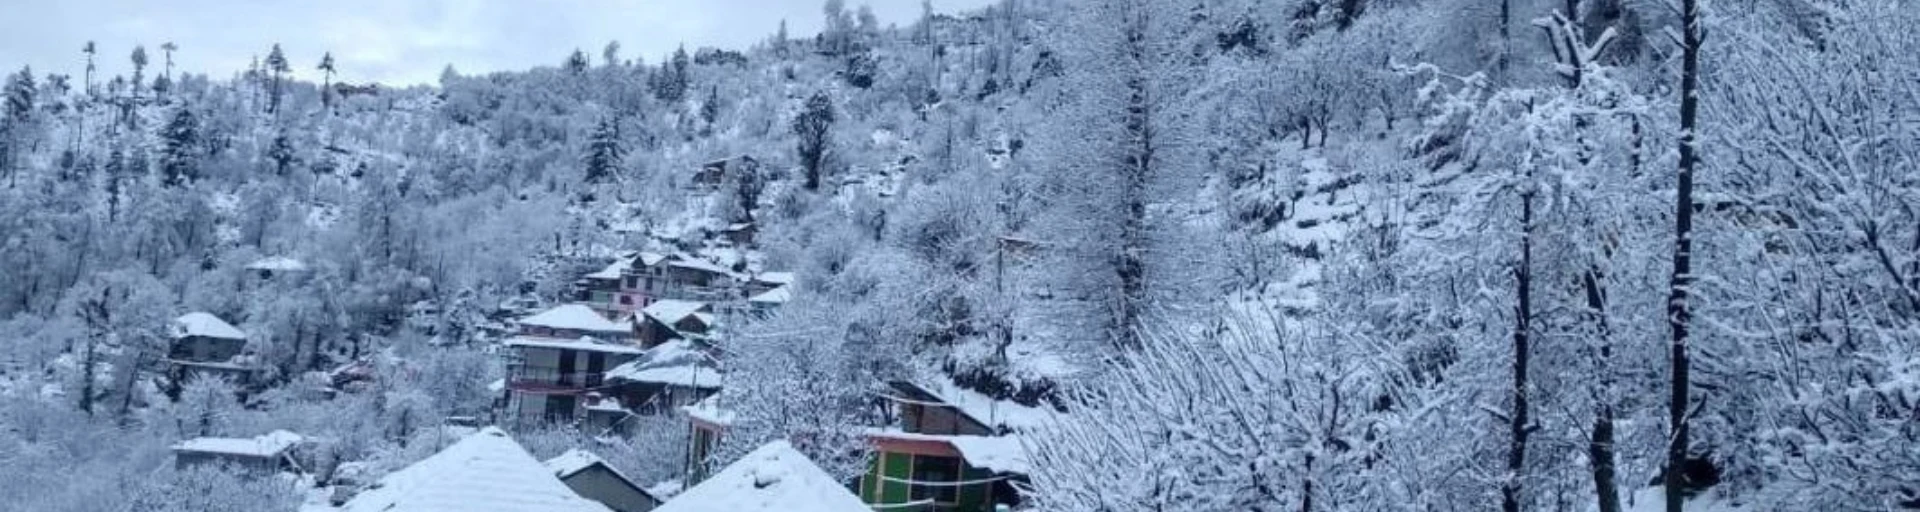 Snowfall In Himachal Featured Image